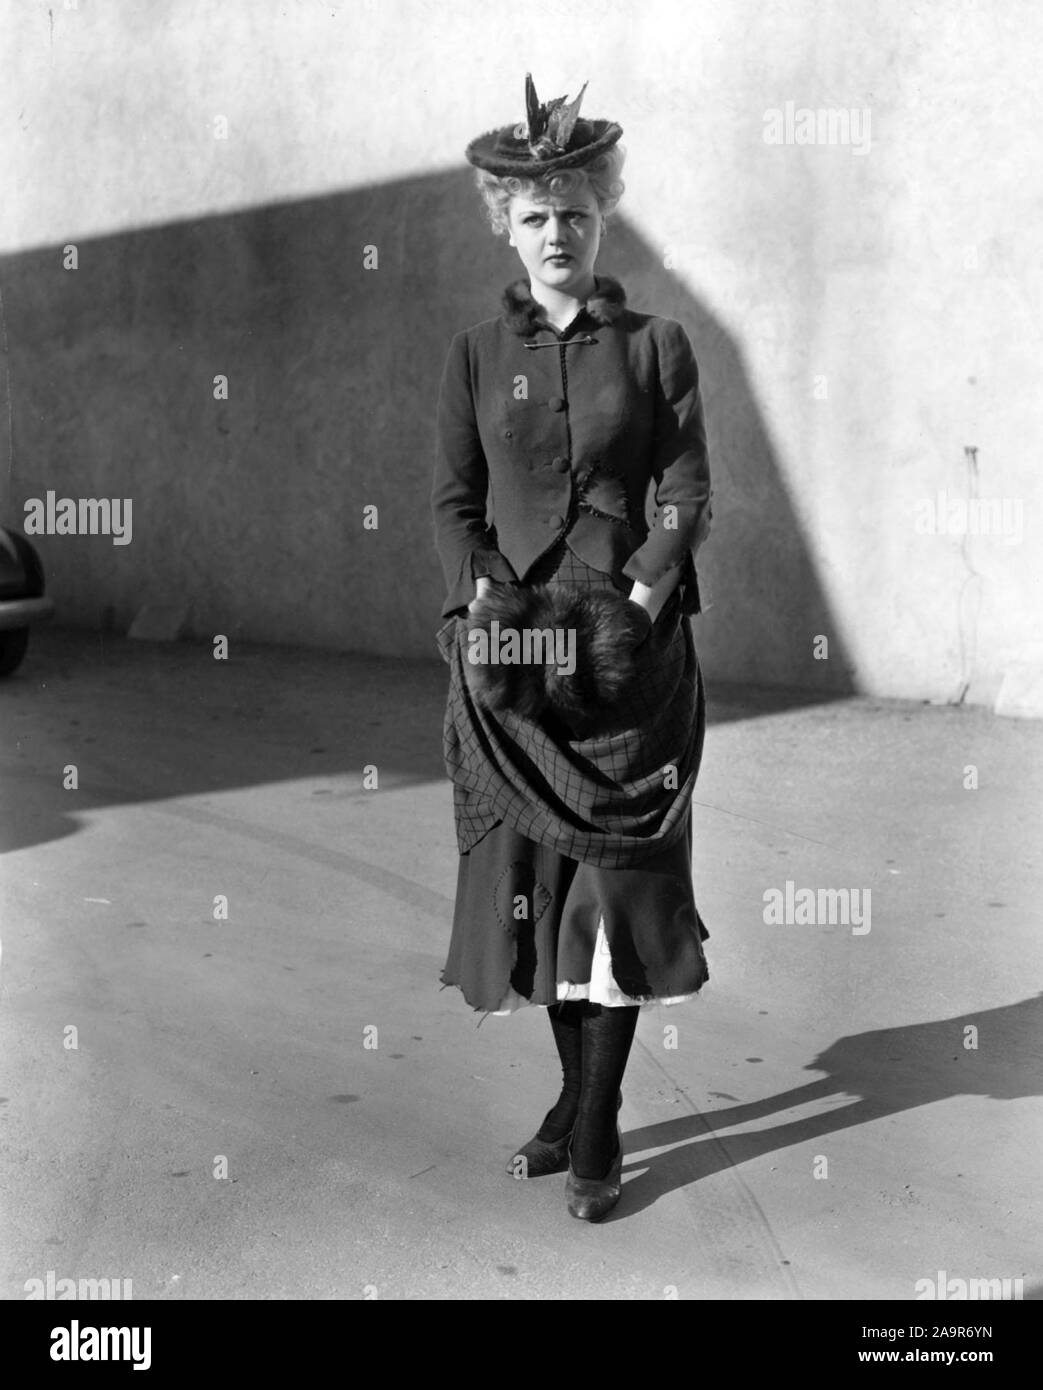 ANGELA LANSBURY in THE PICTURE OF DORIAN GRAY (1945), directed by ALBERT LEWIN. Credit: M.G.M / Album Stock Photo